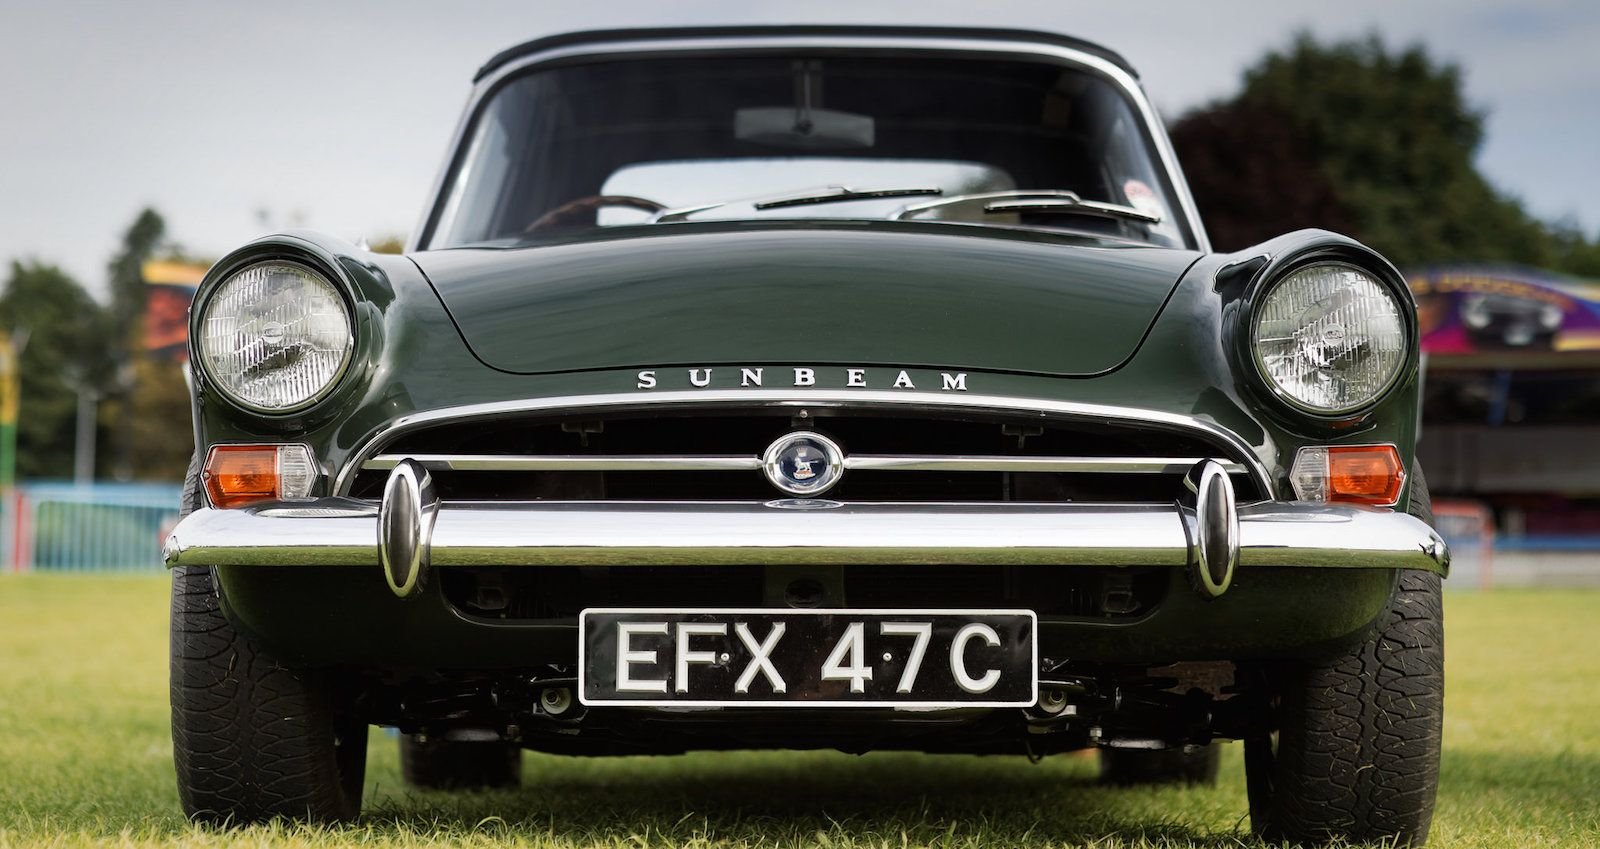 15 Classic Cars That Are Criminally Overlooked